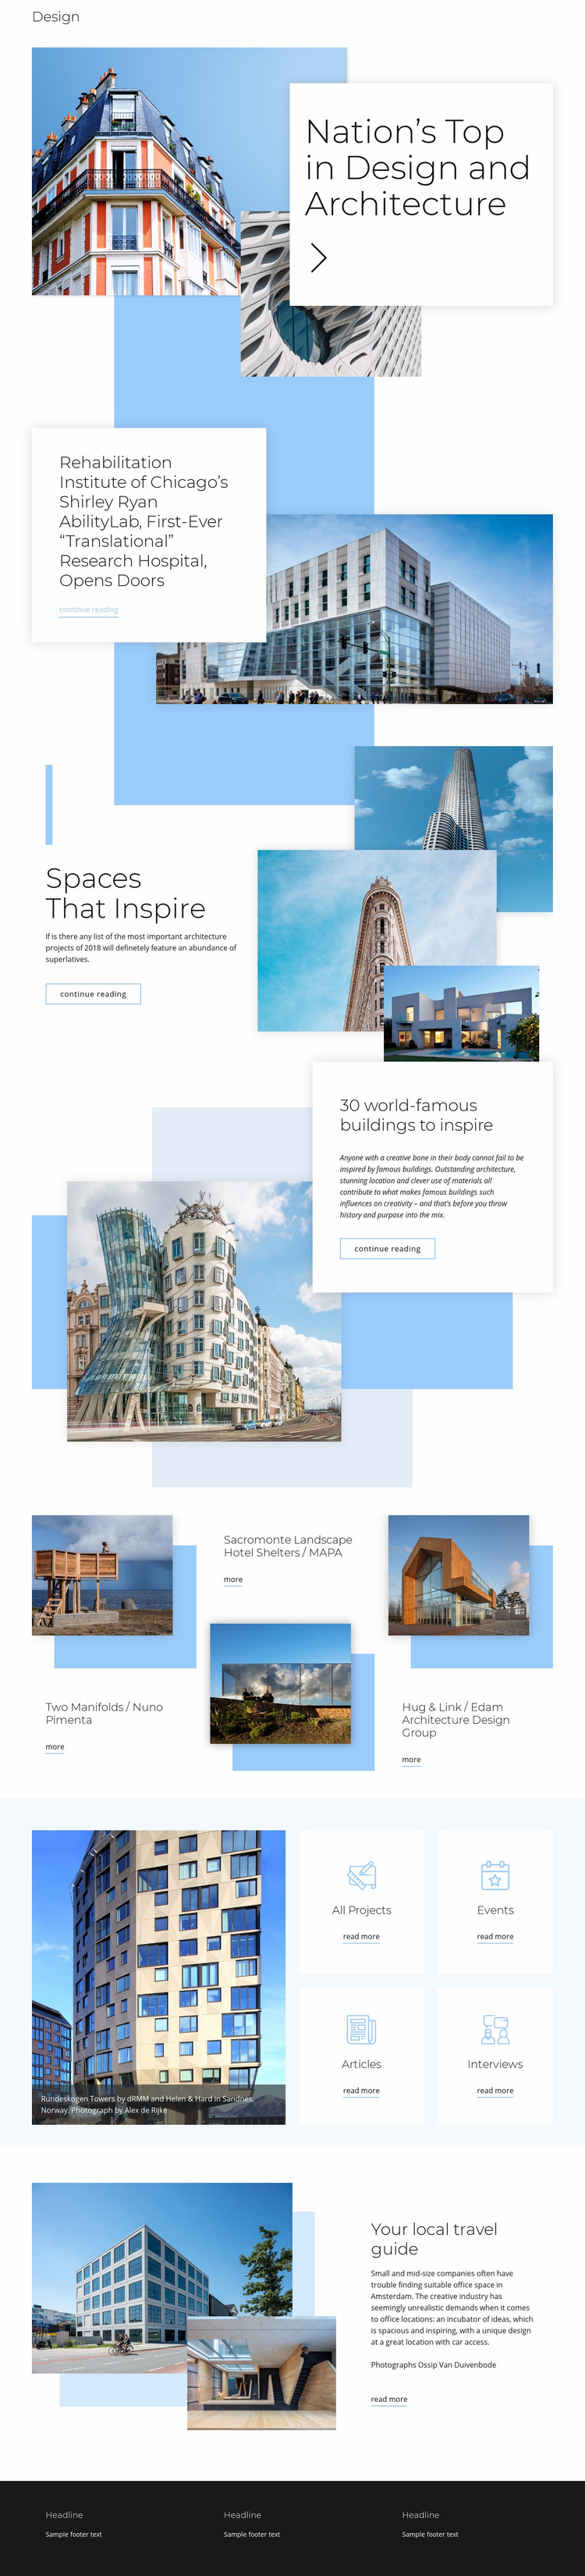 Rating for architecture Web Page Design